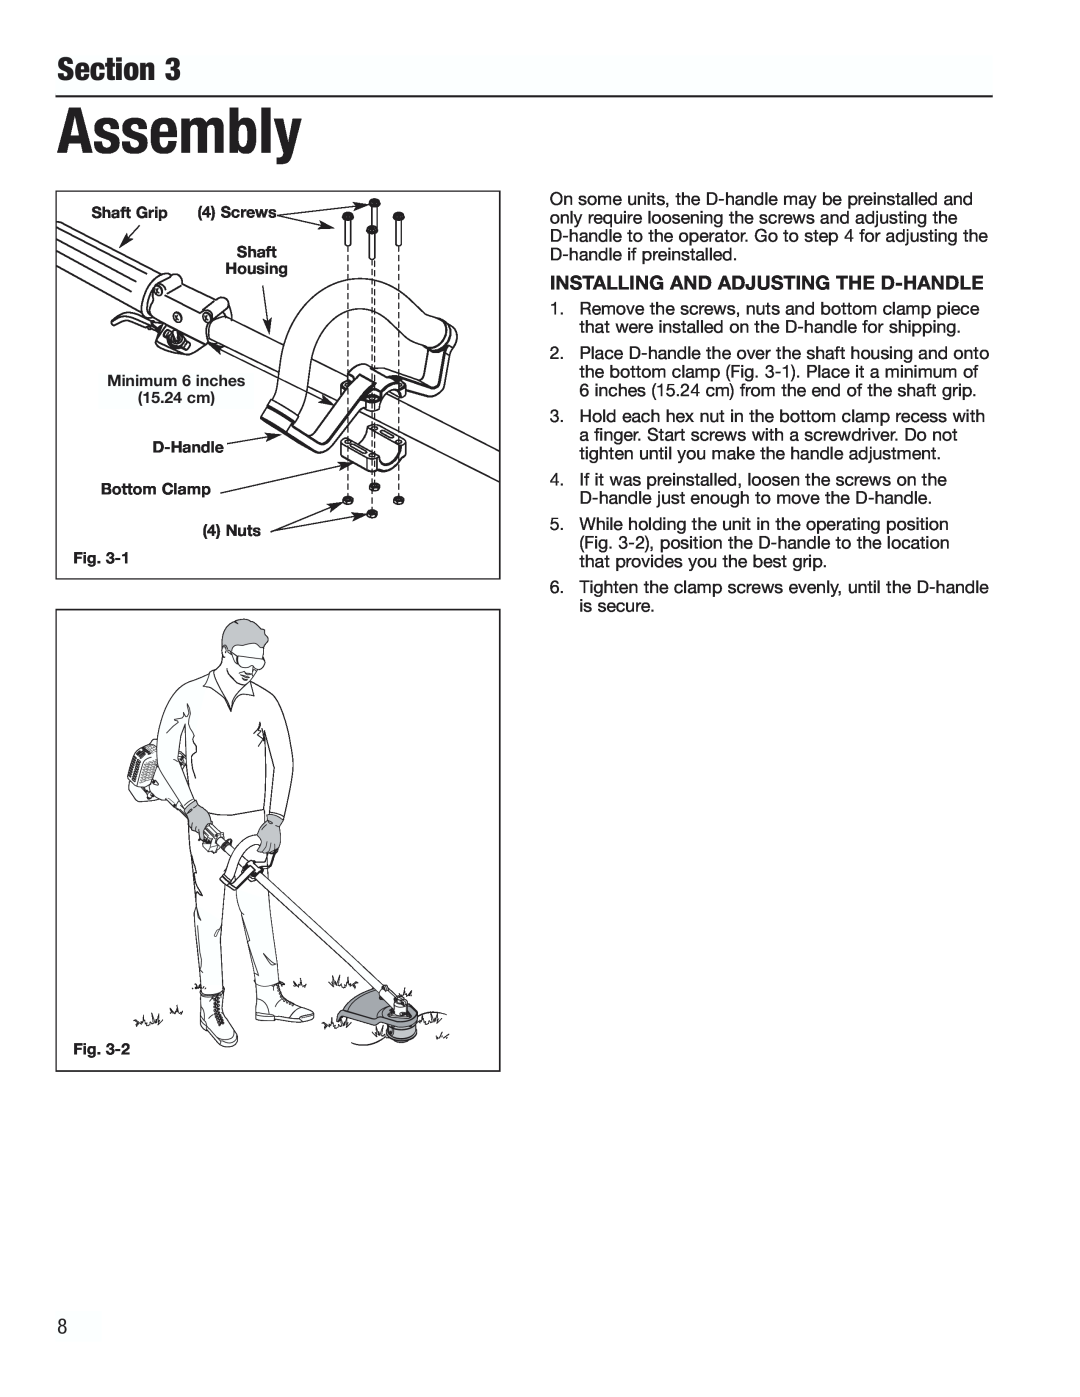 Cub Cadet CC3000 manual Assembly, Section, Installing And Adjusting The D-Handle 